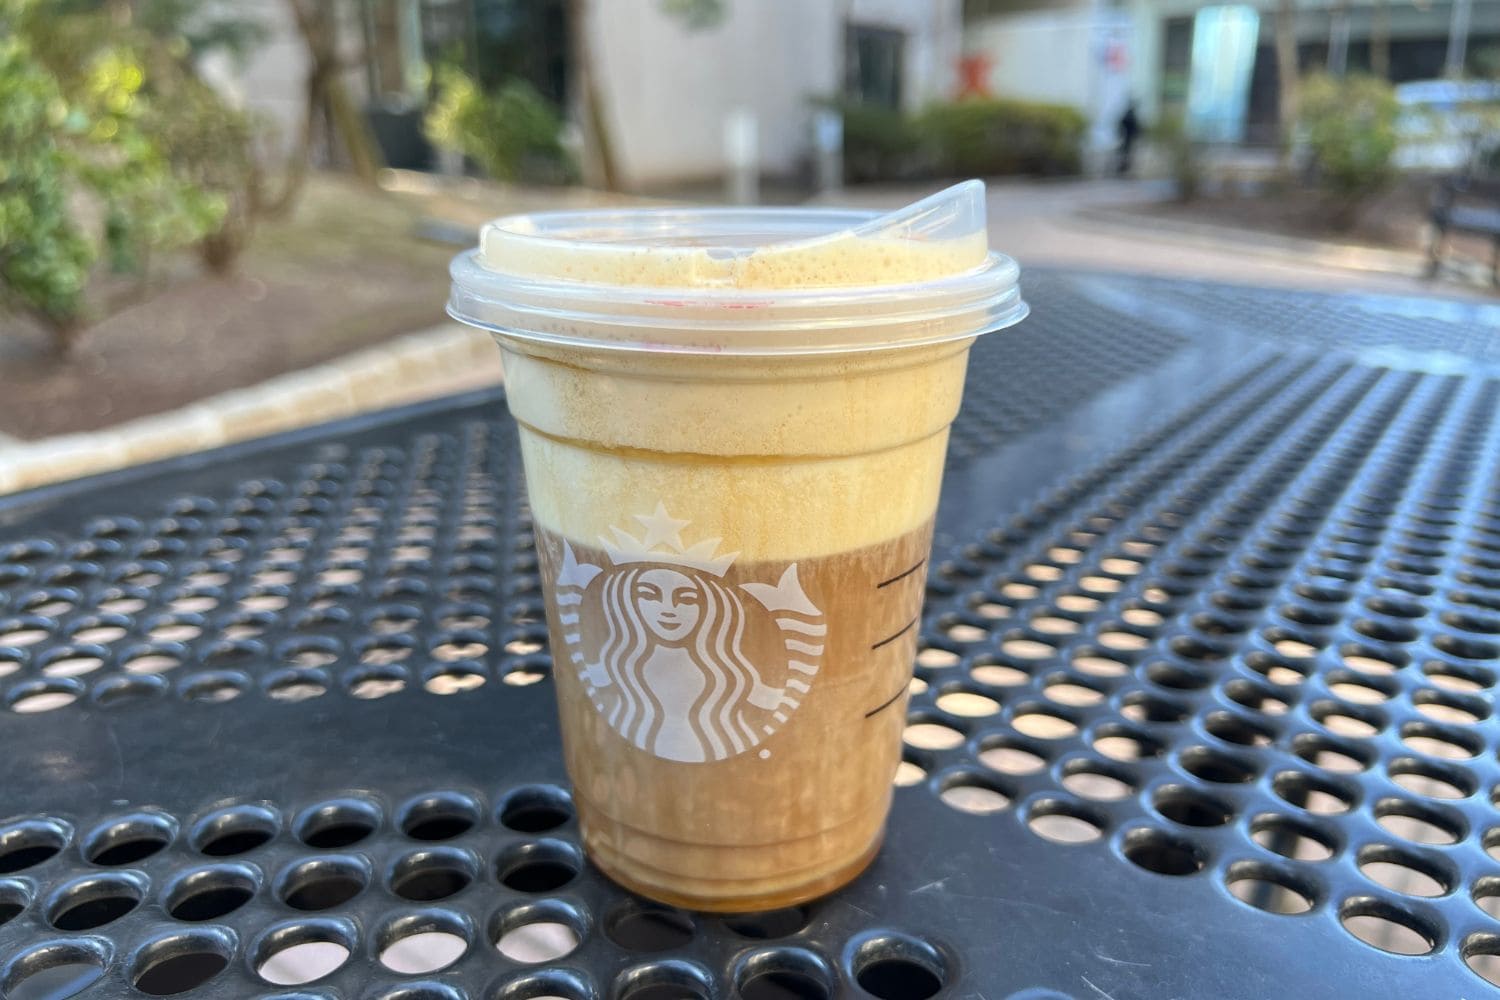 Review: I Tried Starbucks New Spring Drink and Loved It